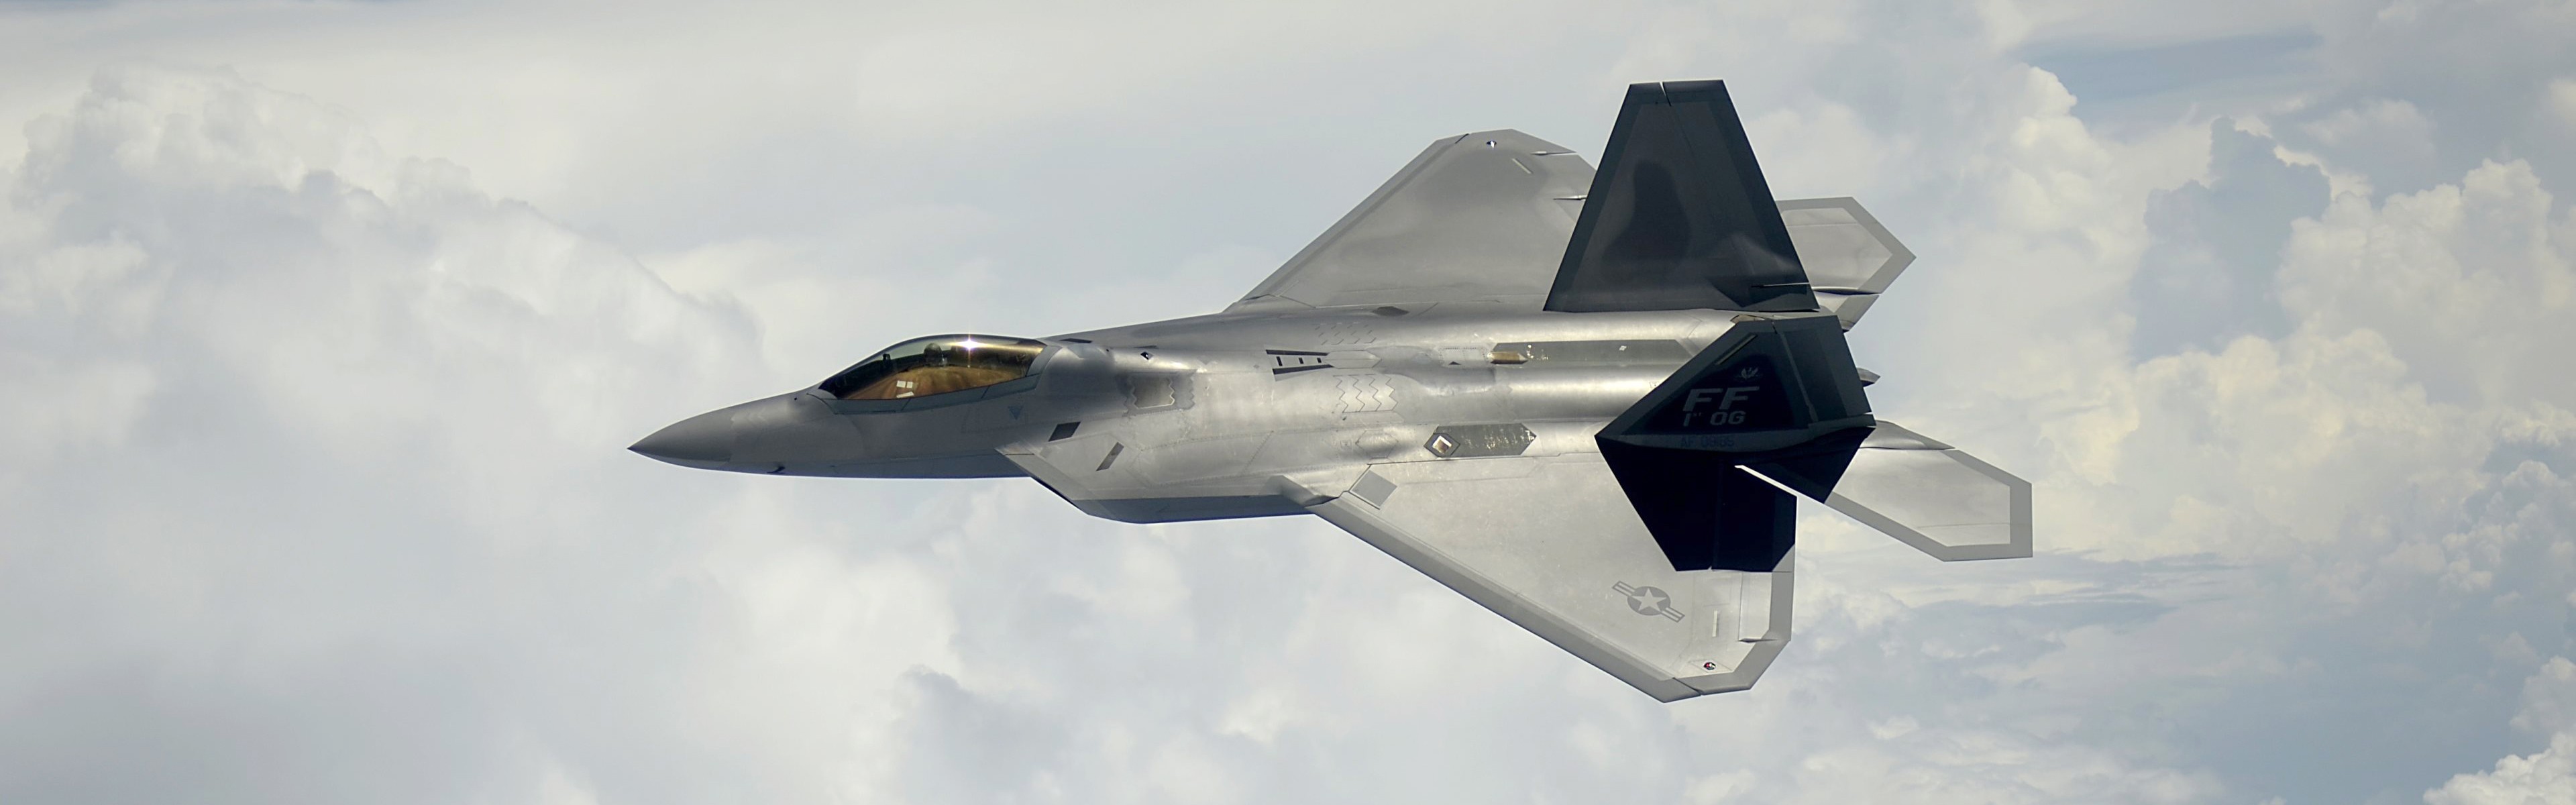 F 22 Raptor Military Aircraft Aircraft Jet Fighter US Air Force Dual Monitors Multiple Display Steal 3840x1200